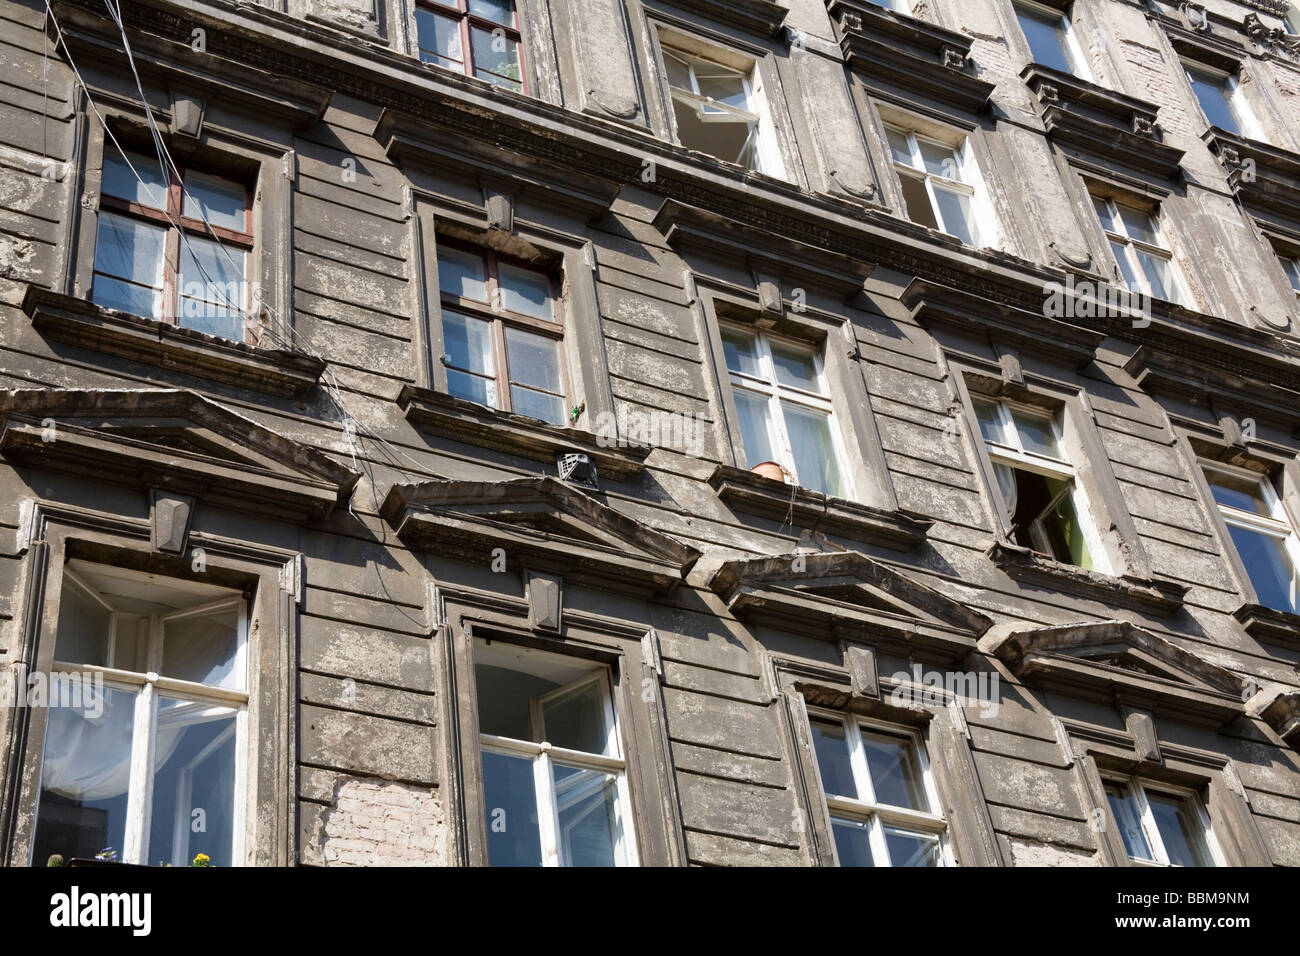 Unrenovated facade of an old building, Prenzlauer Berg, Pankow, Berlin, Germany, Europe Stock Photo